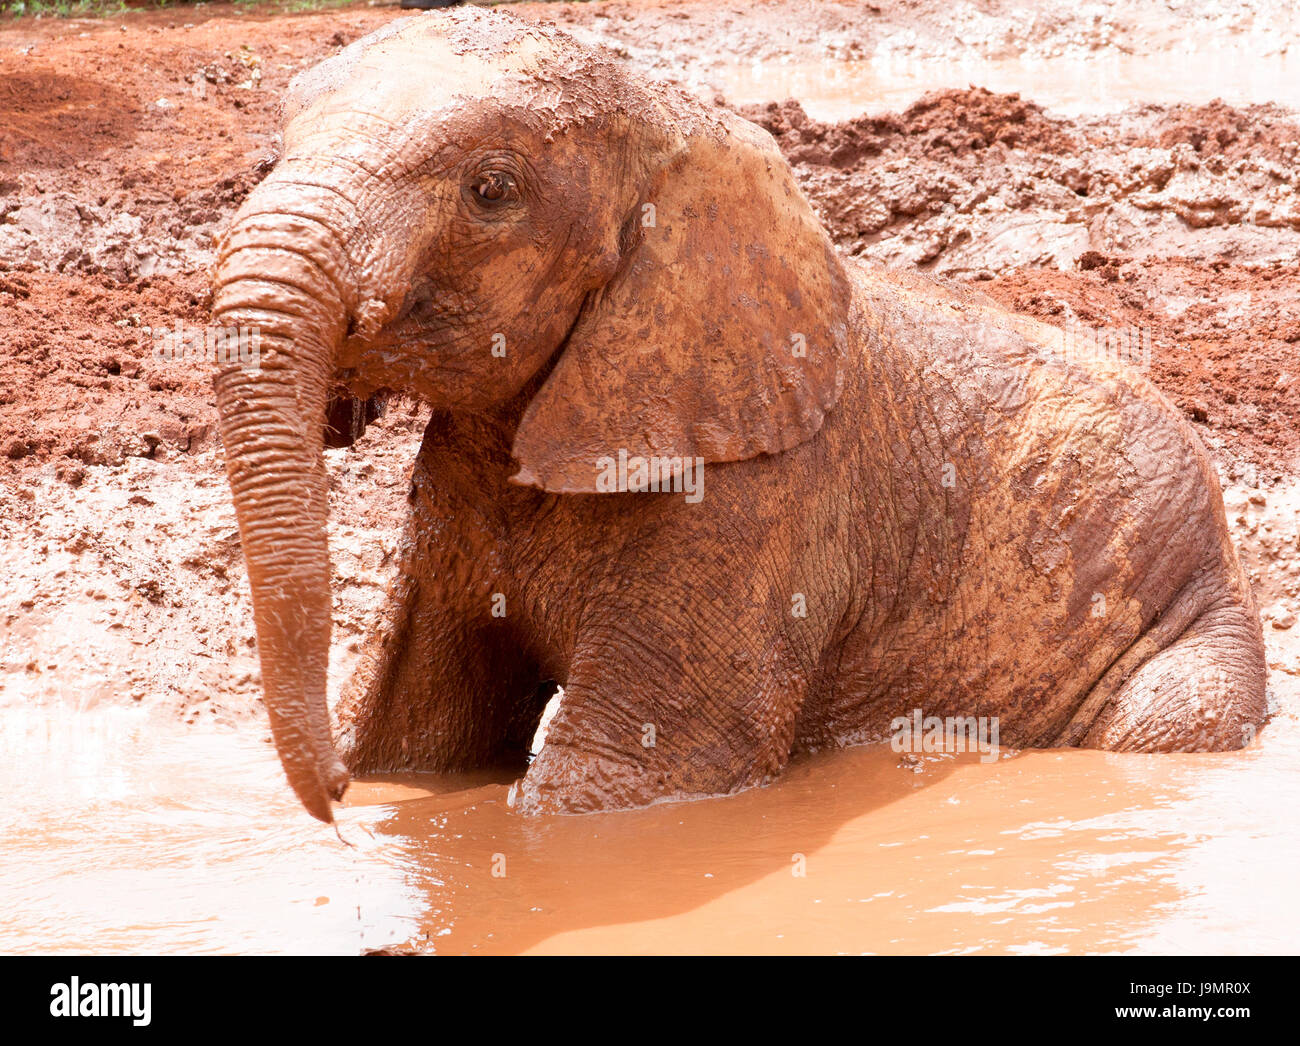 Young elephant sitting in muddy water Stock Photo